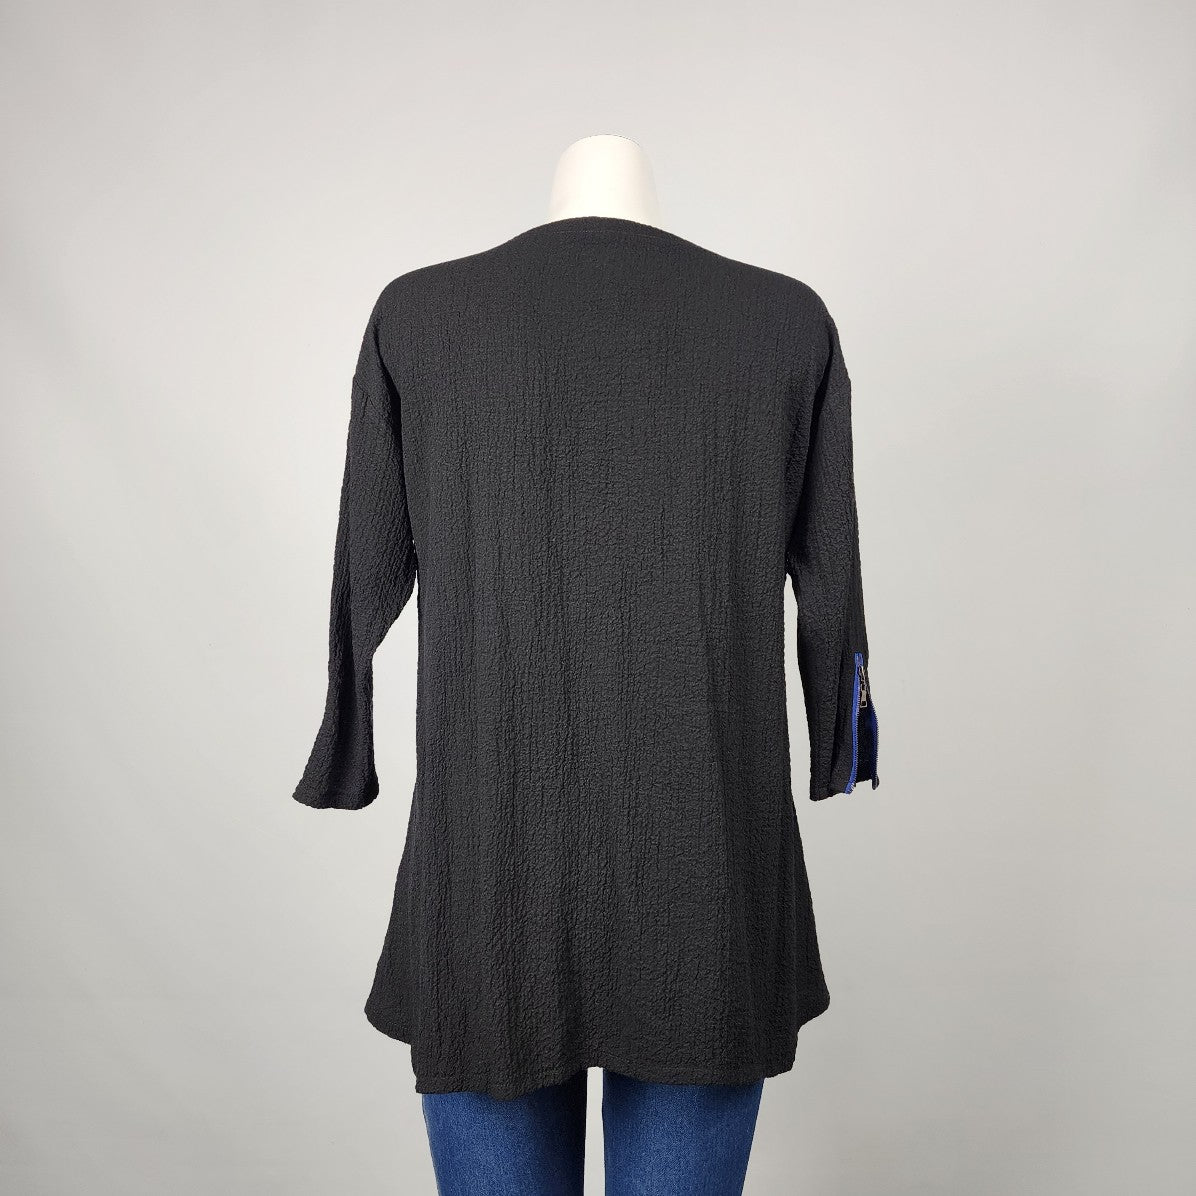 IC by Connie K Black w/ Zip Design Top Size S/M